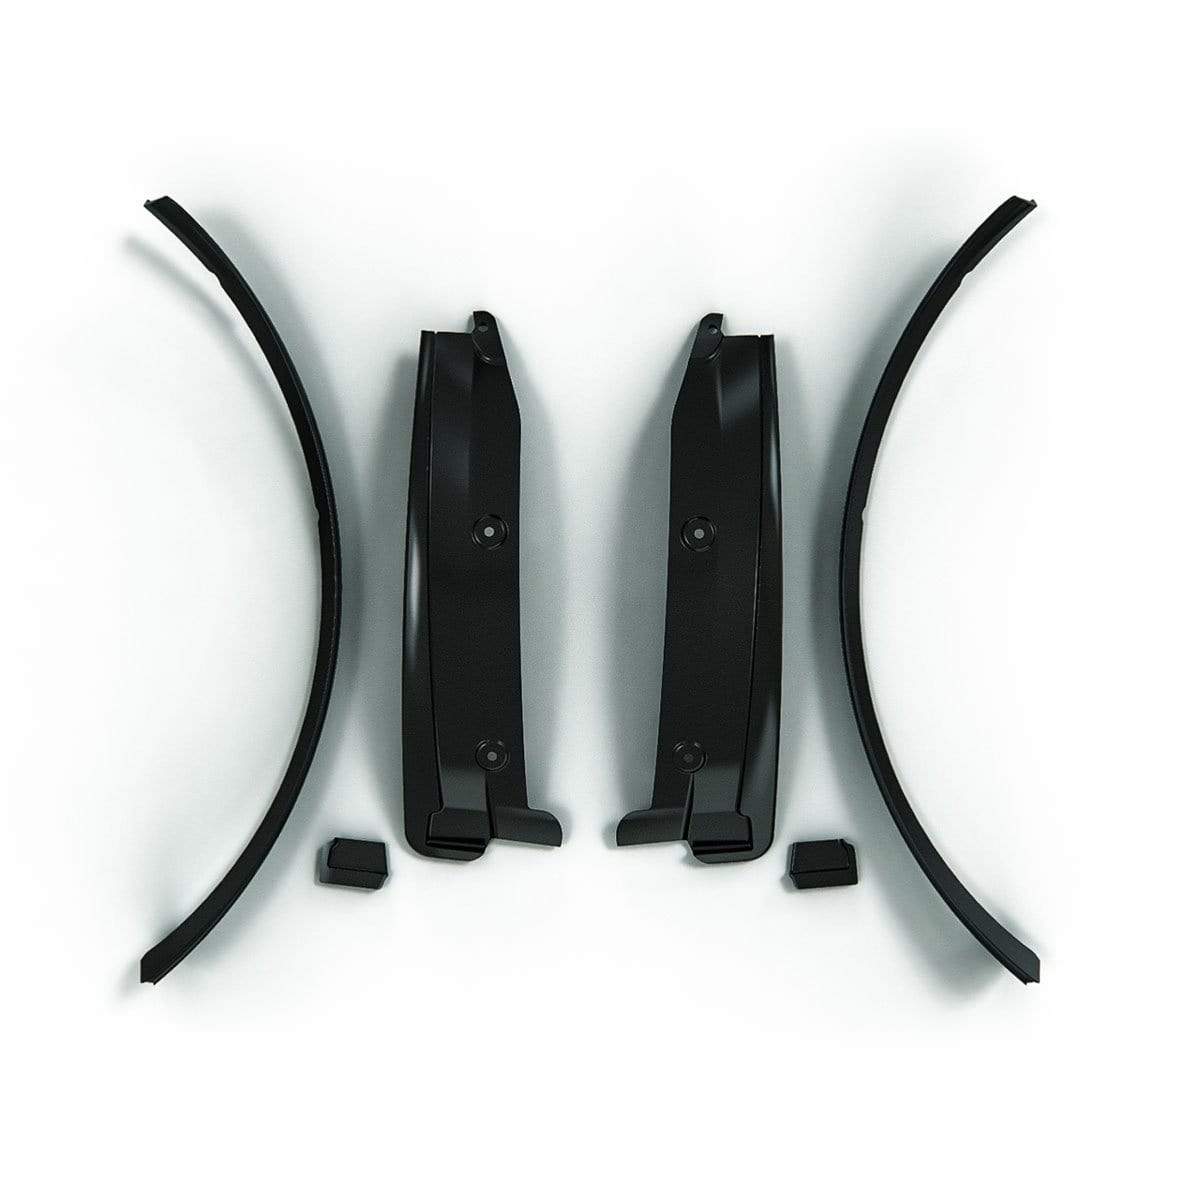 ACS Composite C7 Corvette Rear Quarter Extensions in Carbon Flash Black [45-4-257]CFZ[45-4-257-N]: Provides protection and a seamless look for your Corvette's rear fender.